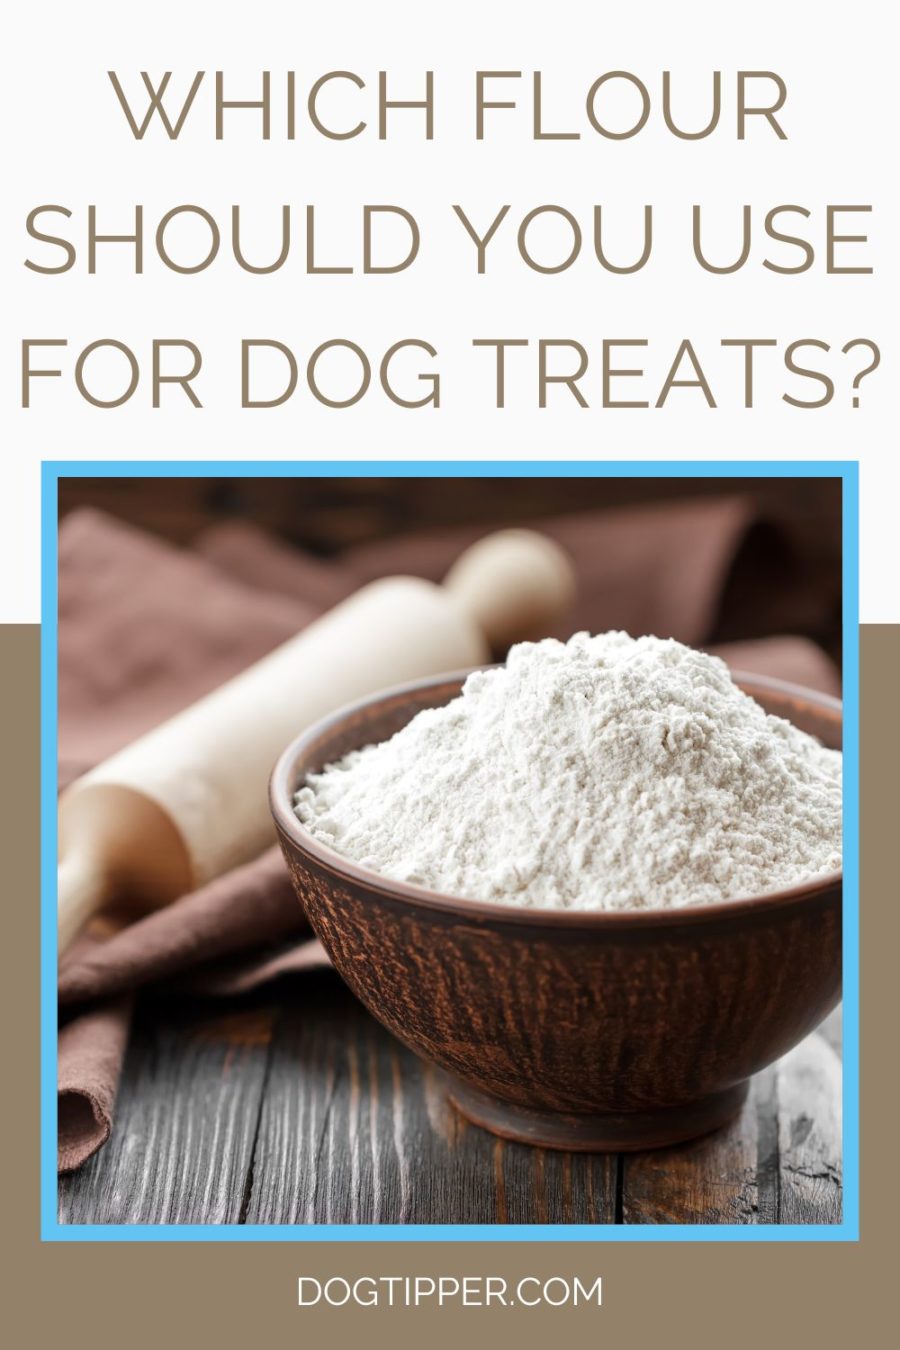 Which Flour Should You Use for Baking Dog Treats?